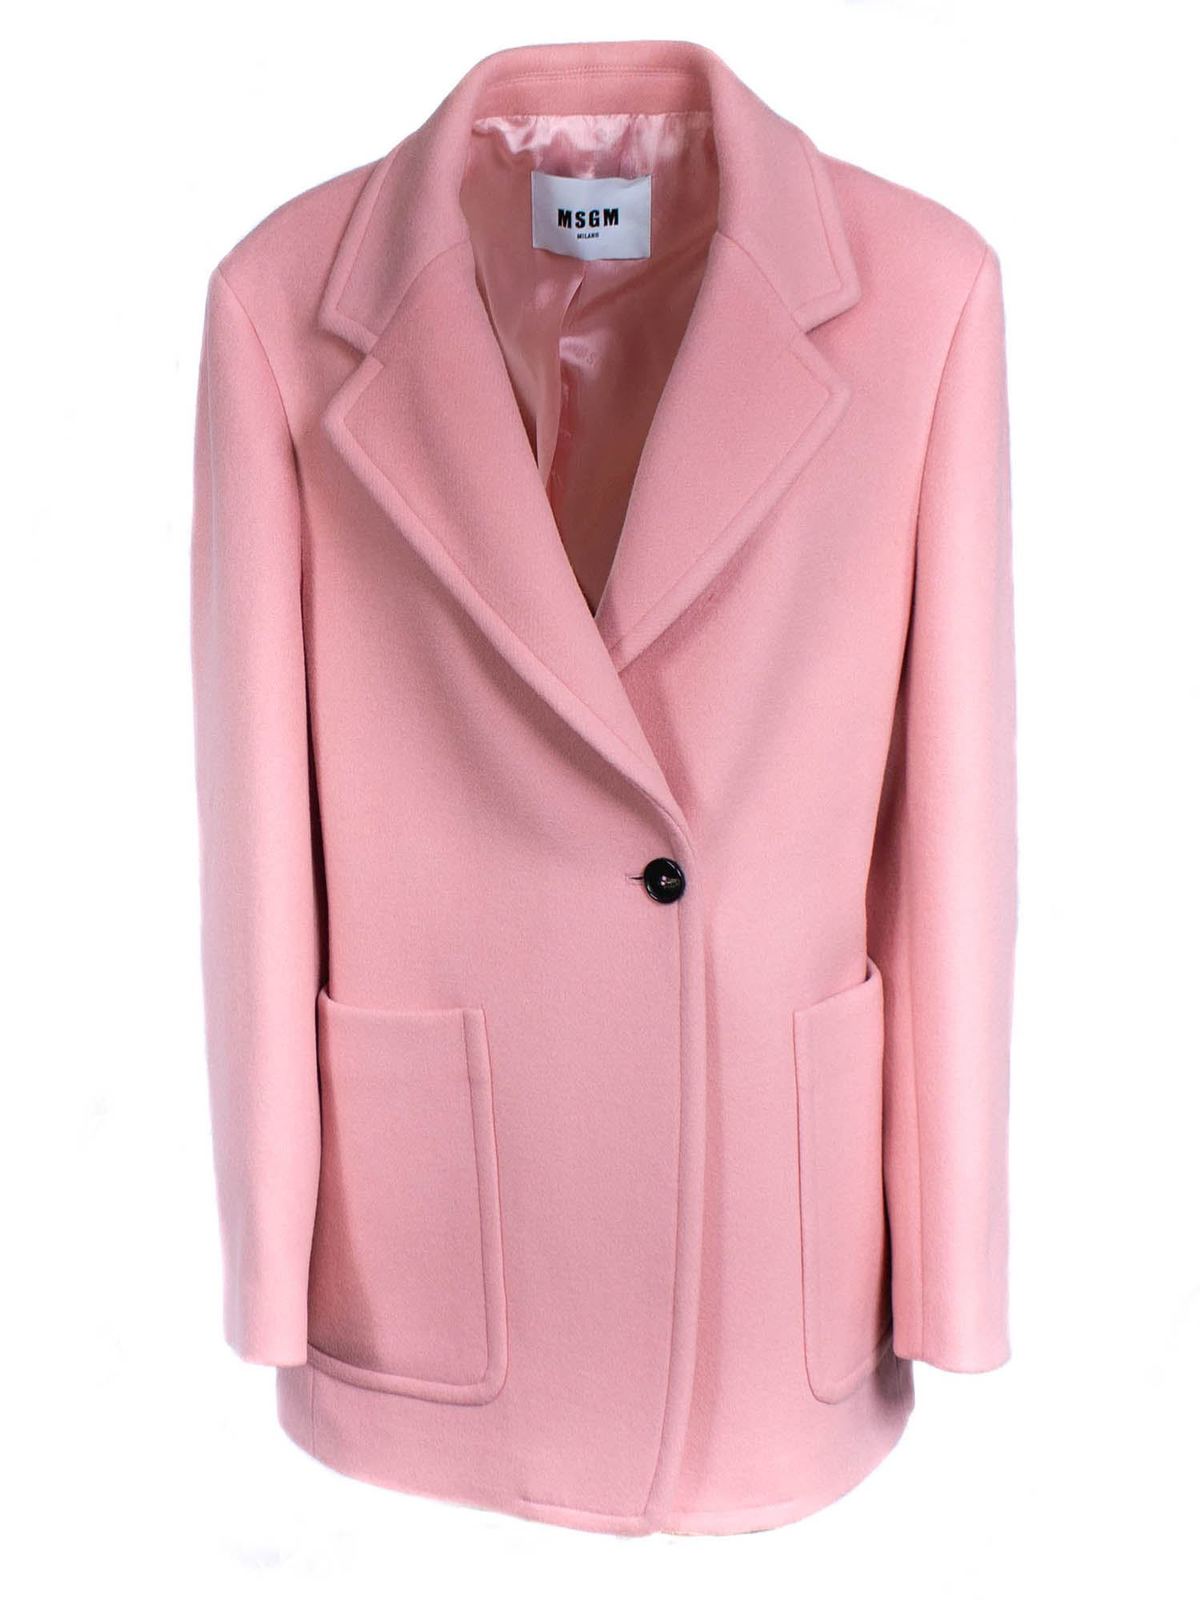 Blazers M.S.G.M. - One buttoned jacket in pink - 3141MDG0321770112